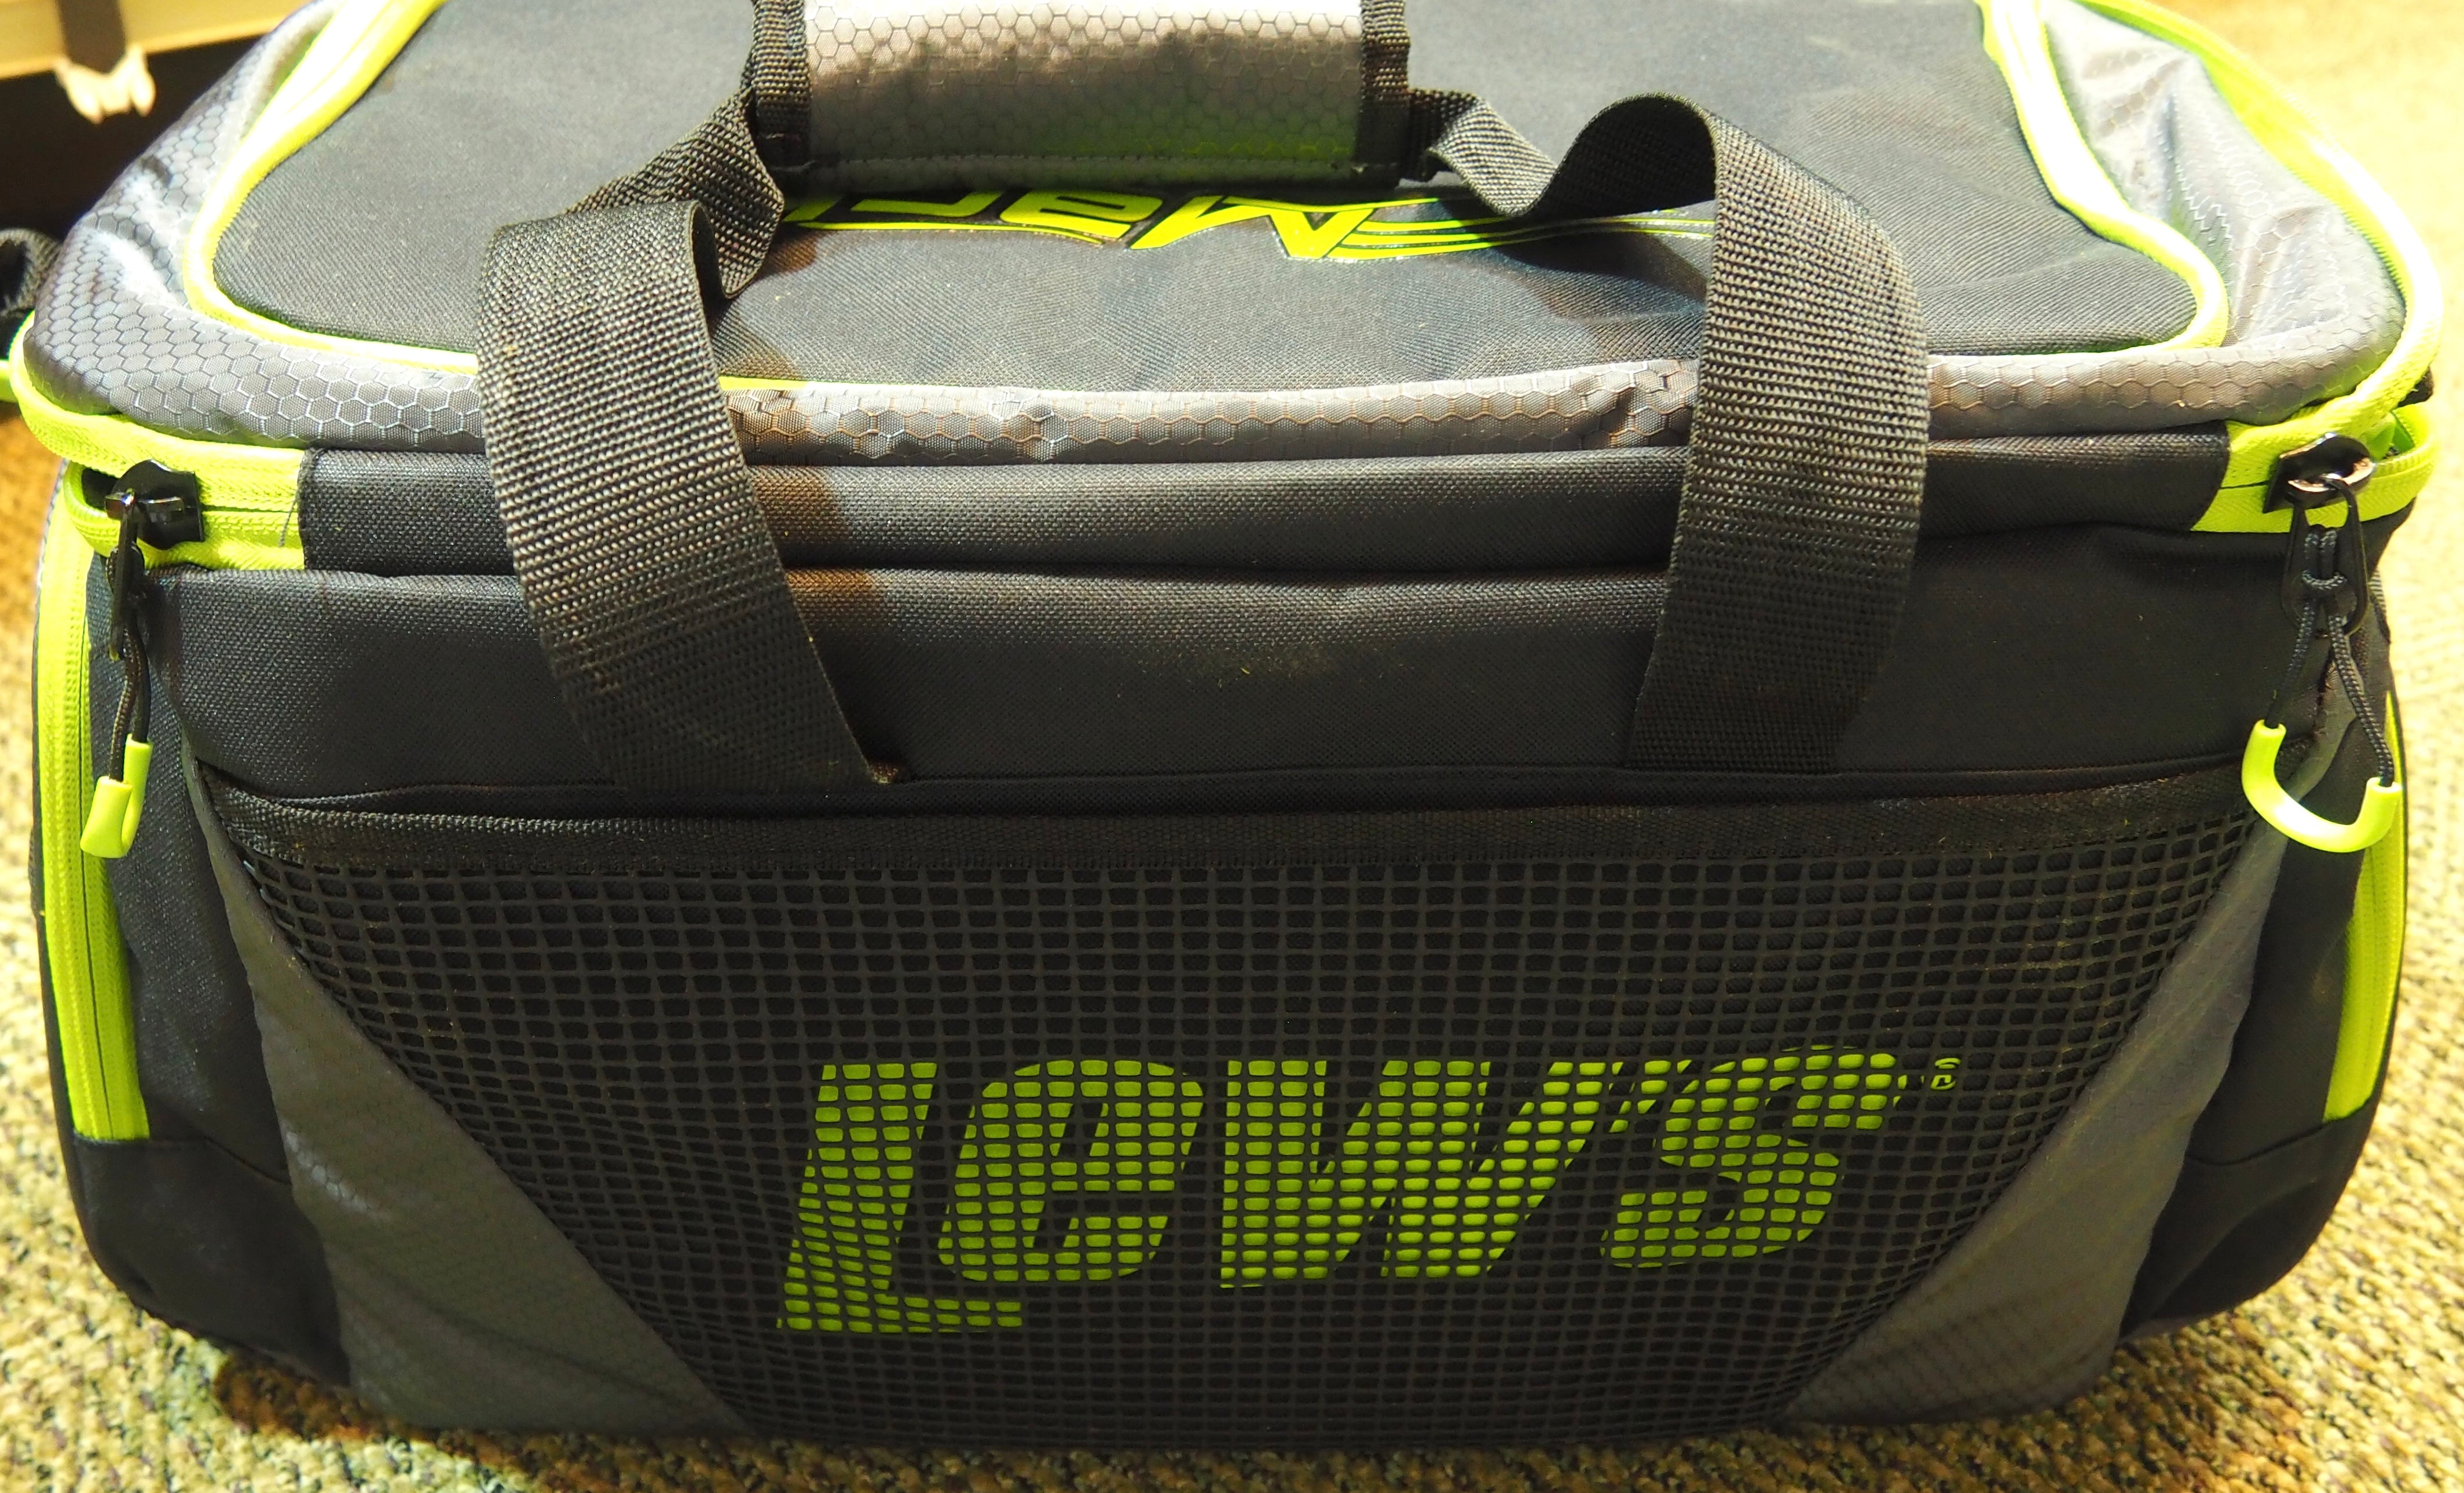 Lew's Mach Tackle Bag — Fin & Feather